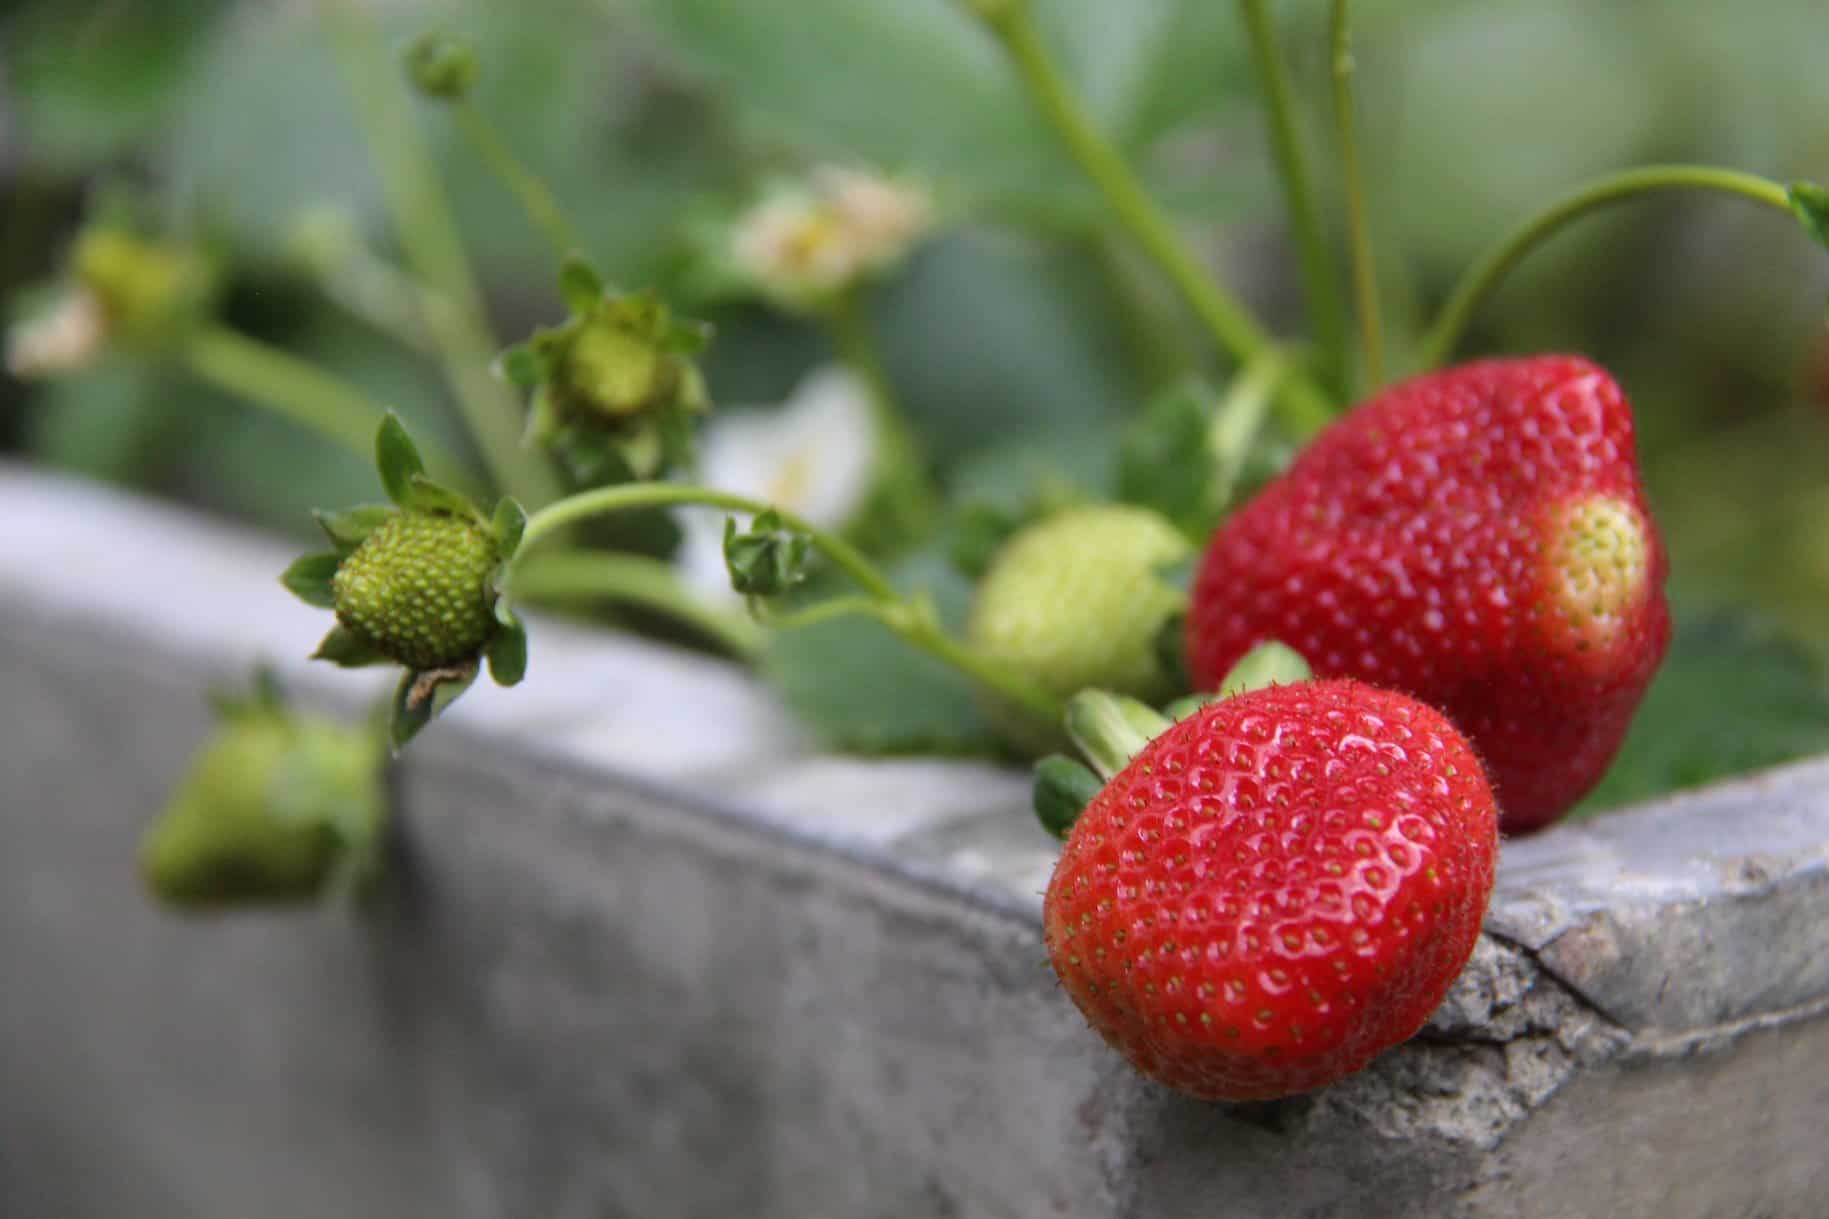 Tristar strawberries growing in concrete planter